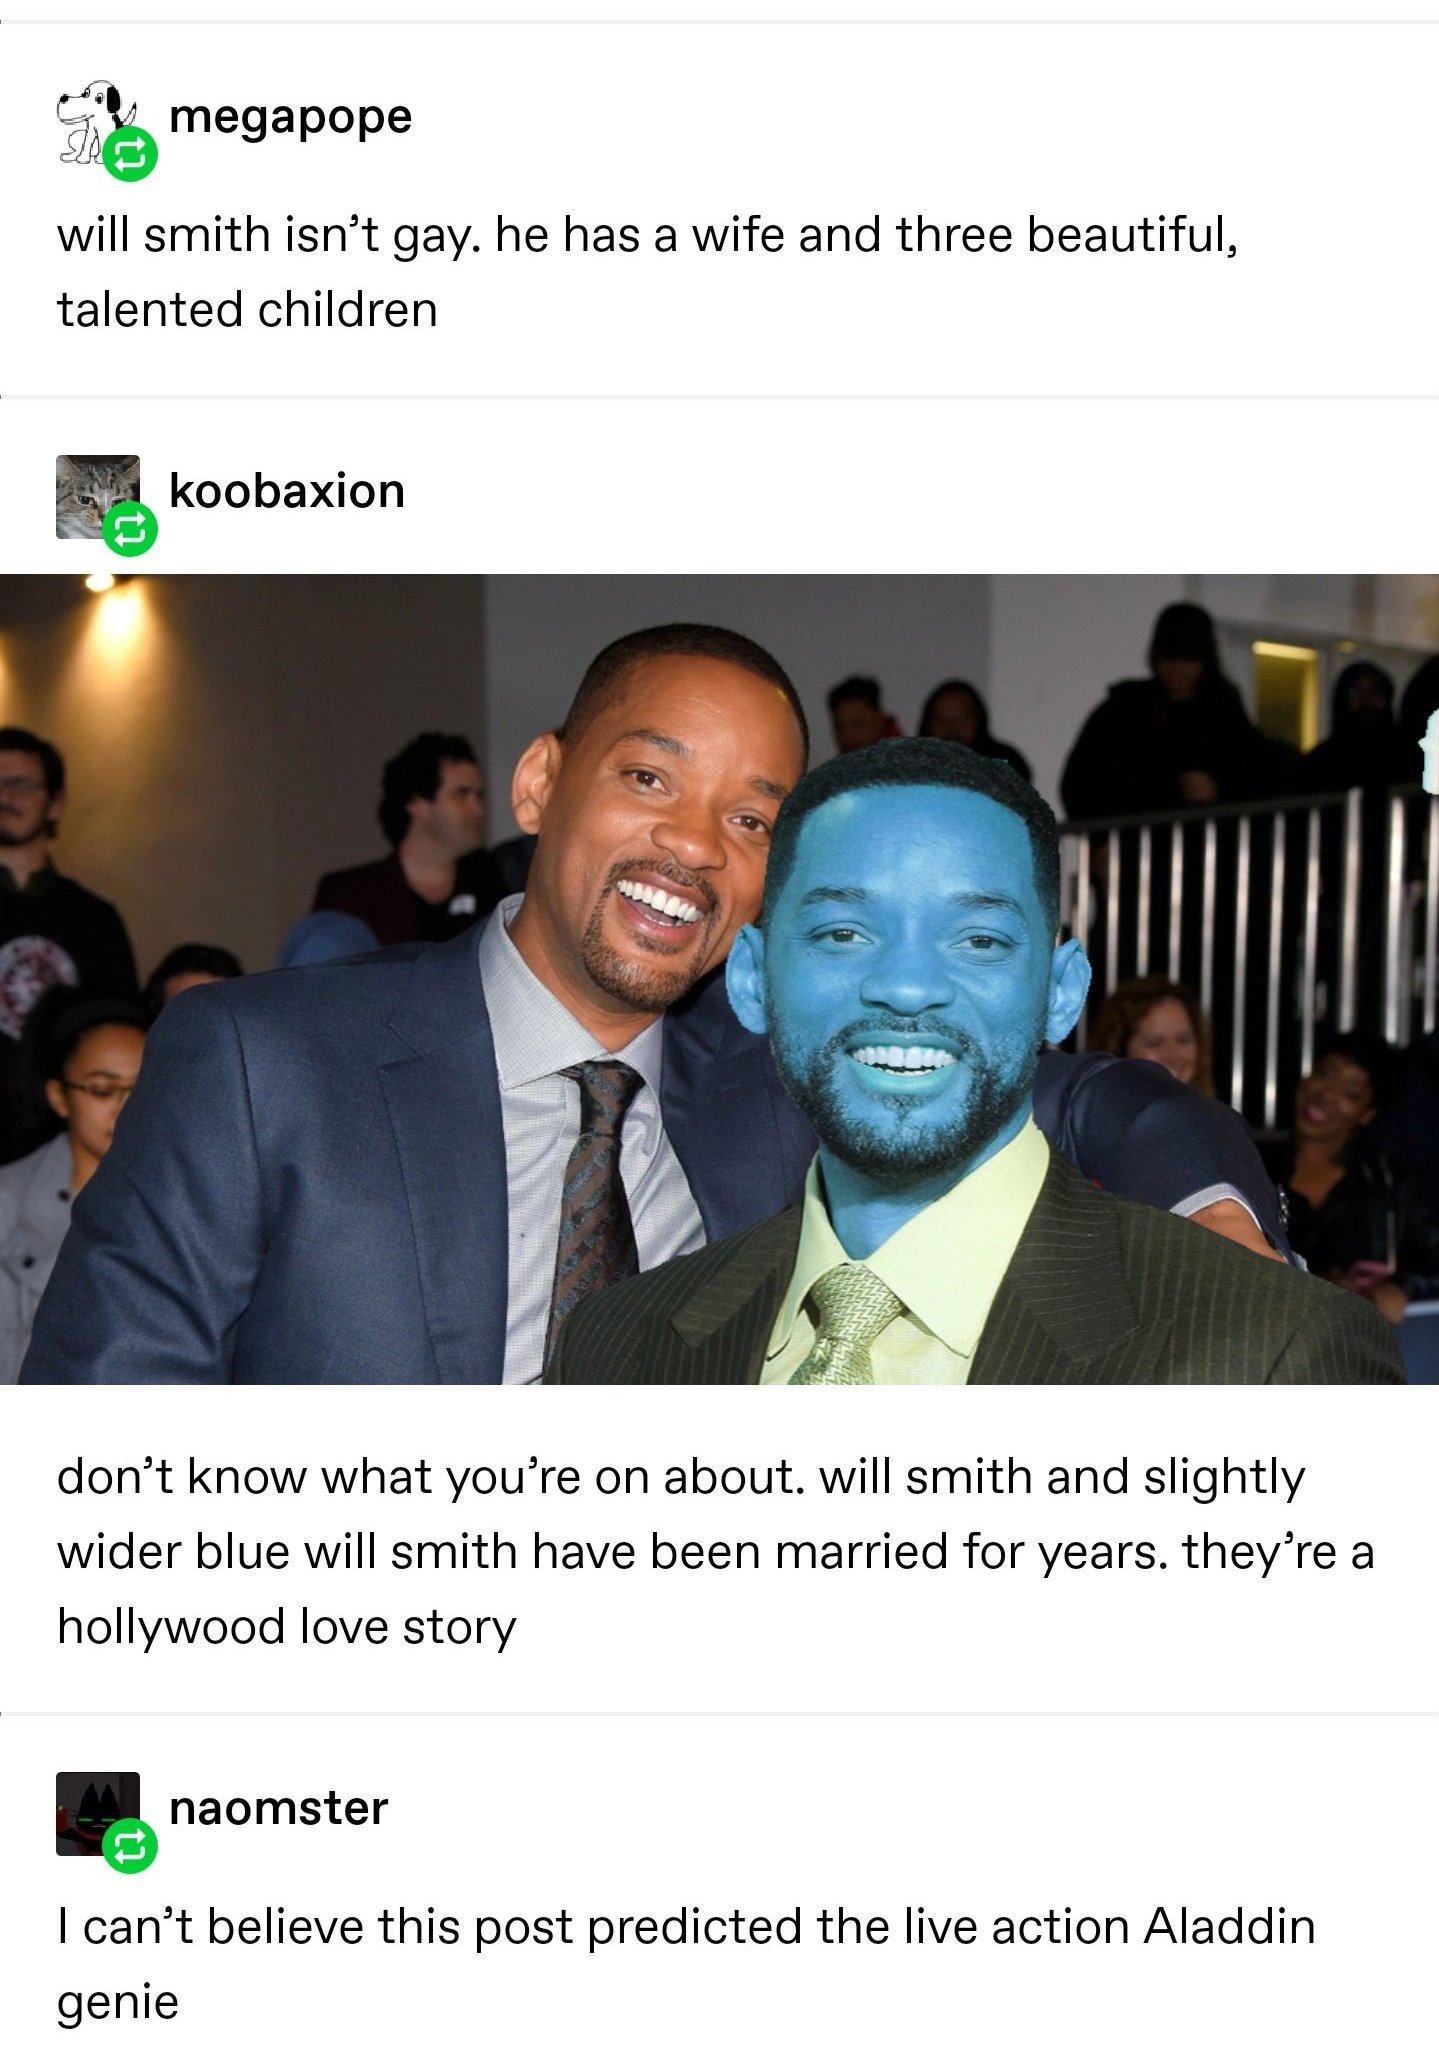 will smith and slightly wider blue will smith - Smegapope will smith isn't gay. he has a wife and three beautiful, talented children koobaxion don't know what you're on about. will smith and slightly wider blue will smith have been married for years. they